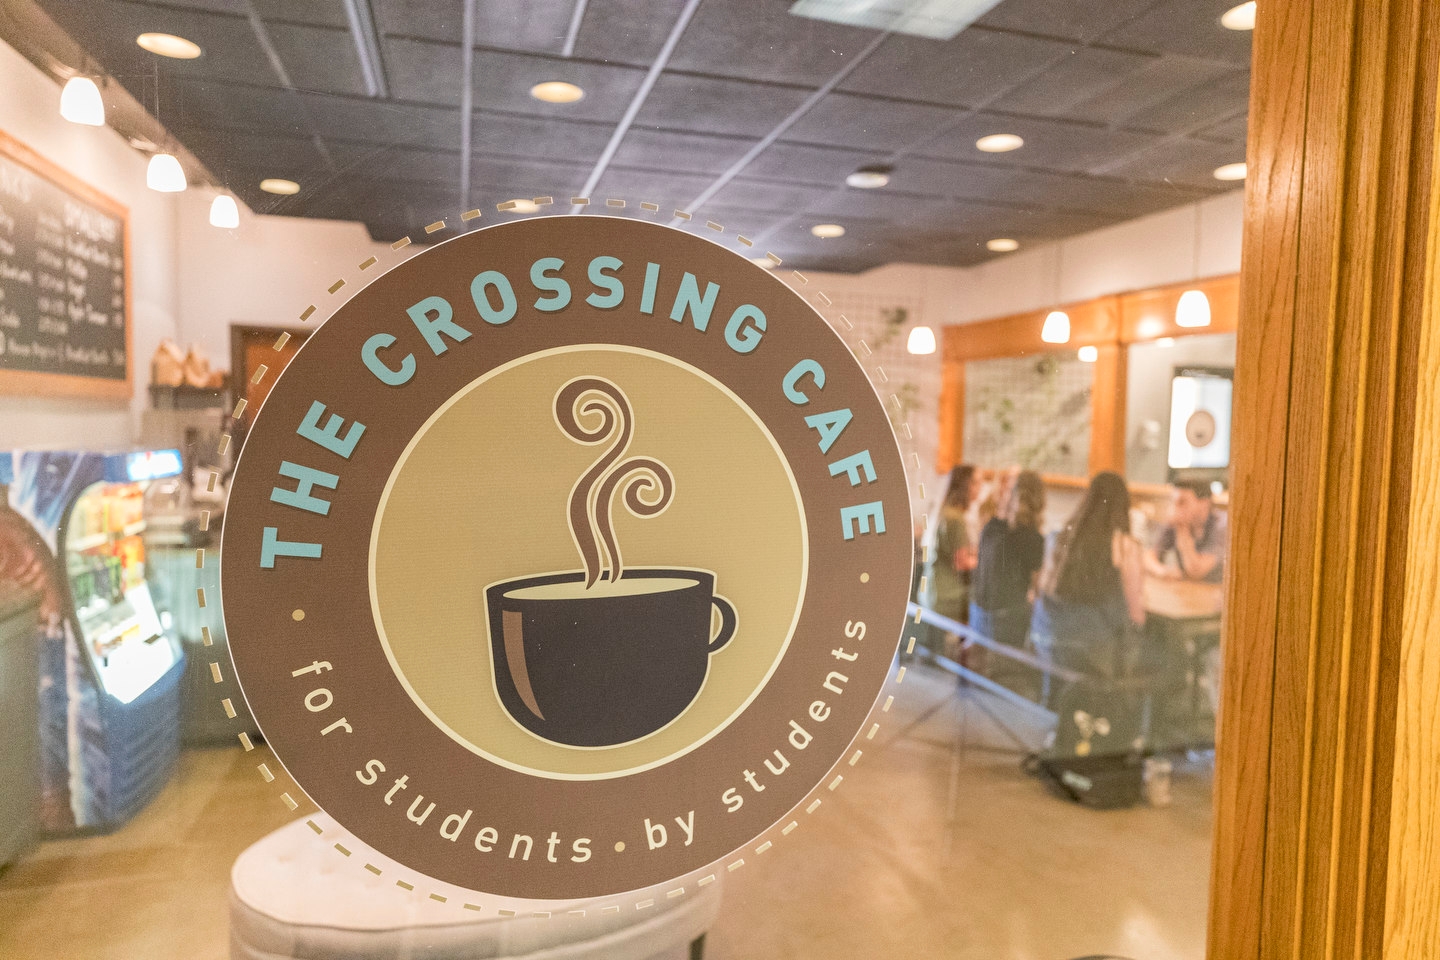 The Crossing Cafe sign